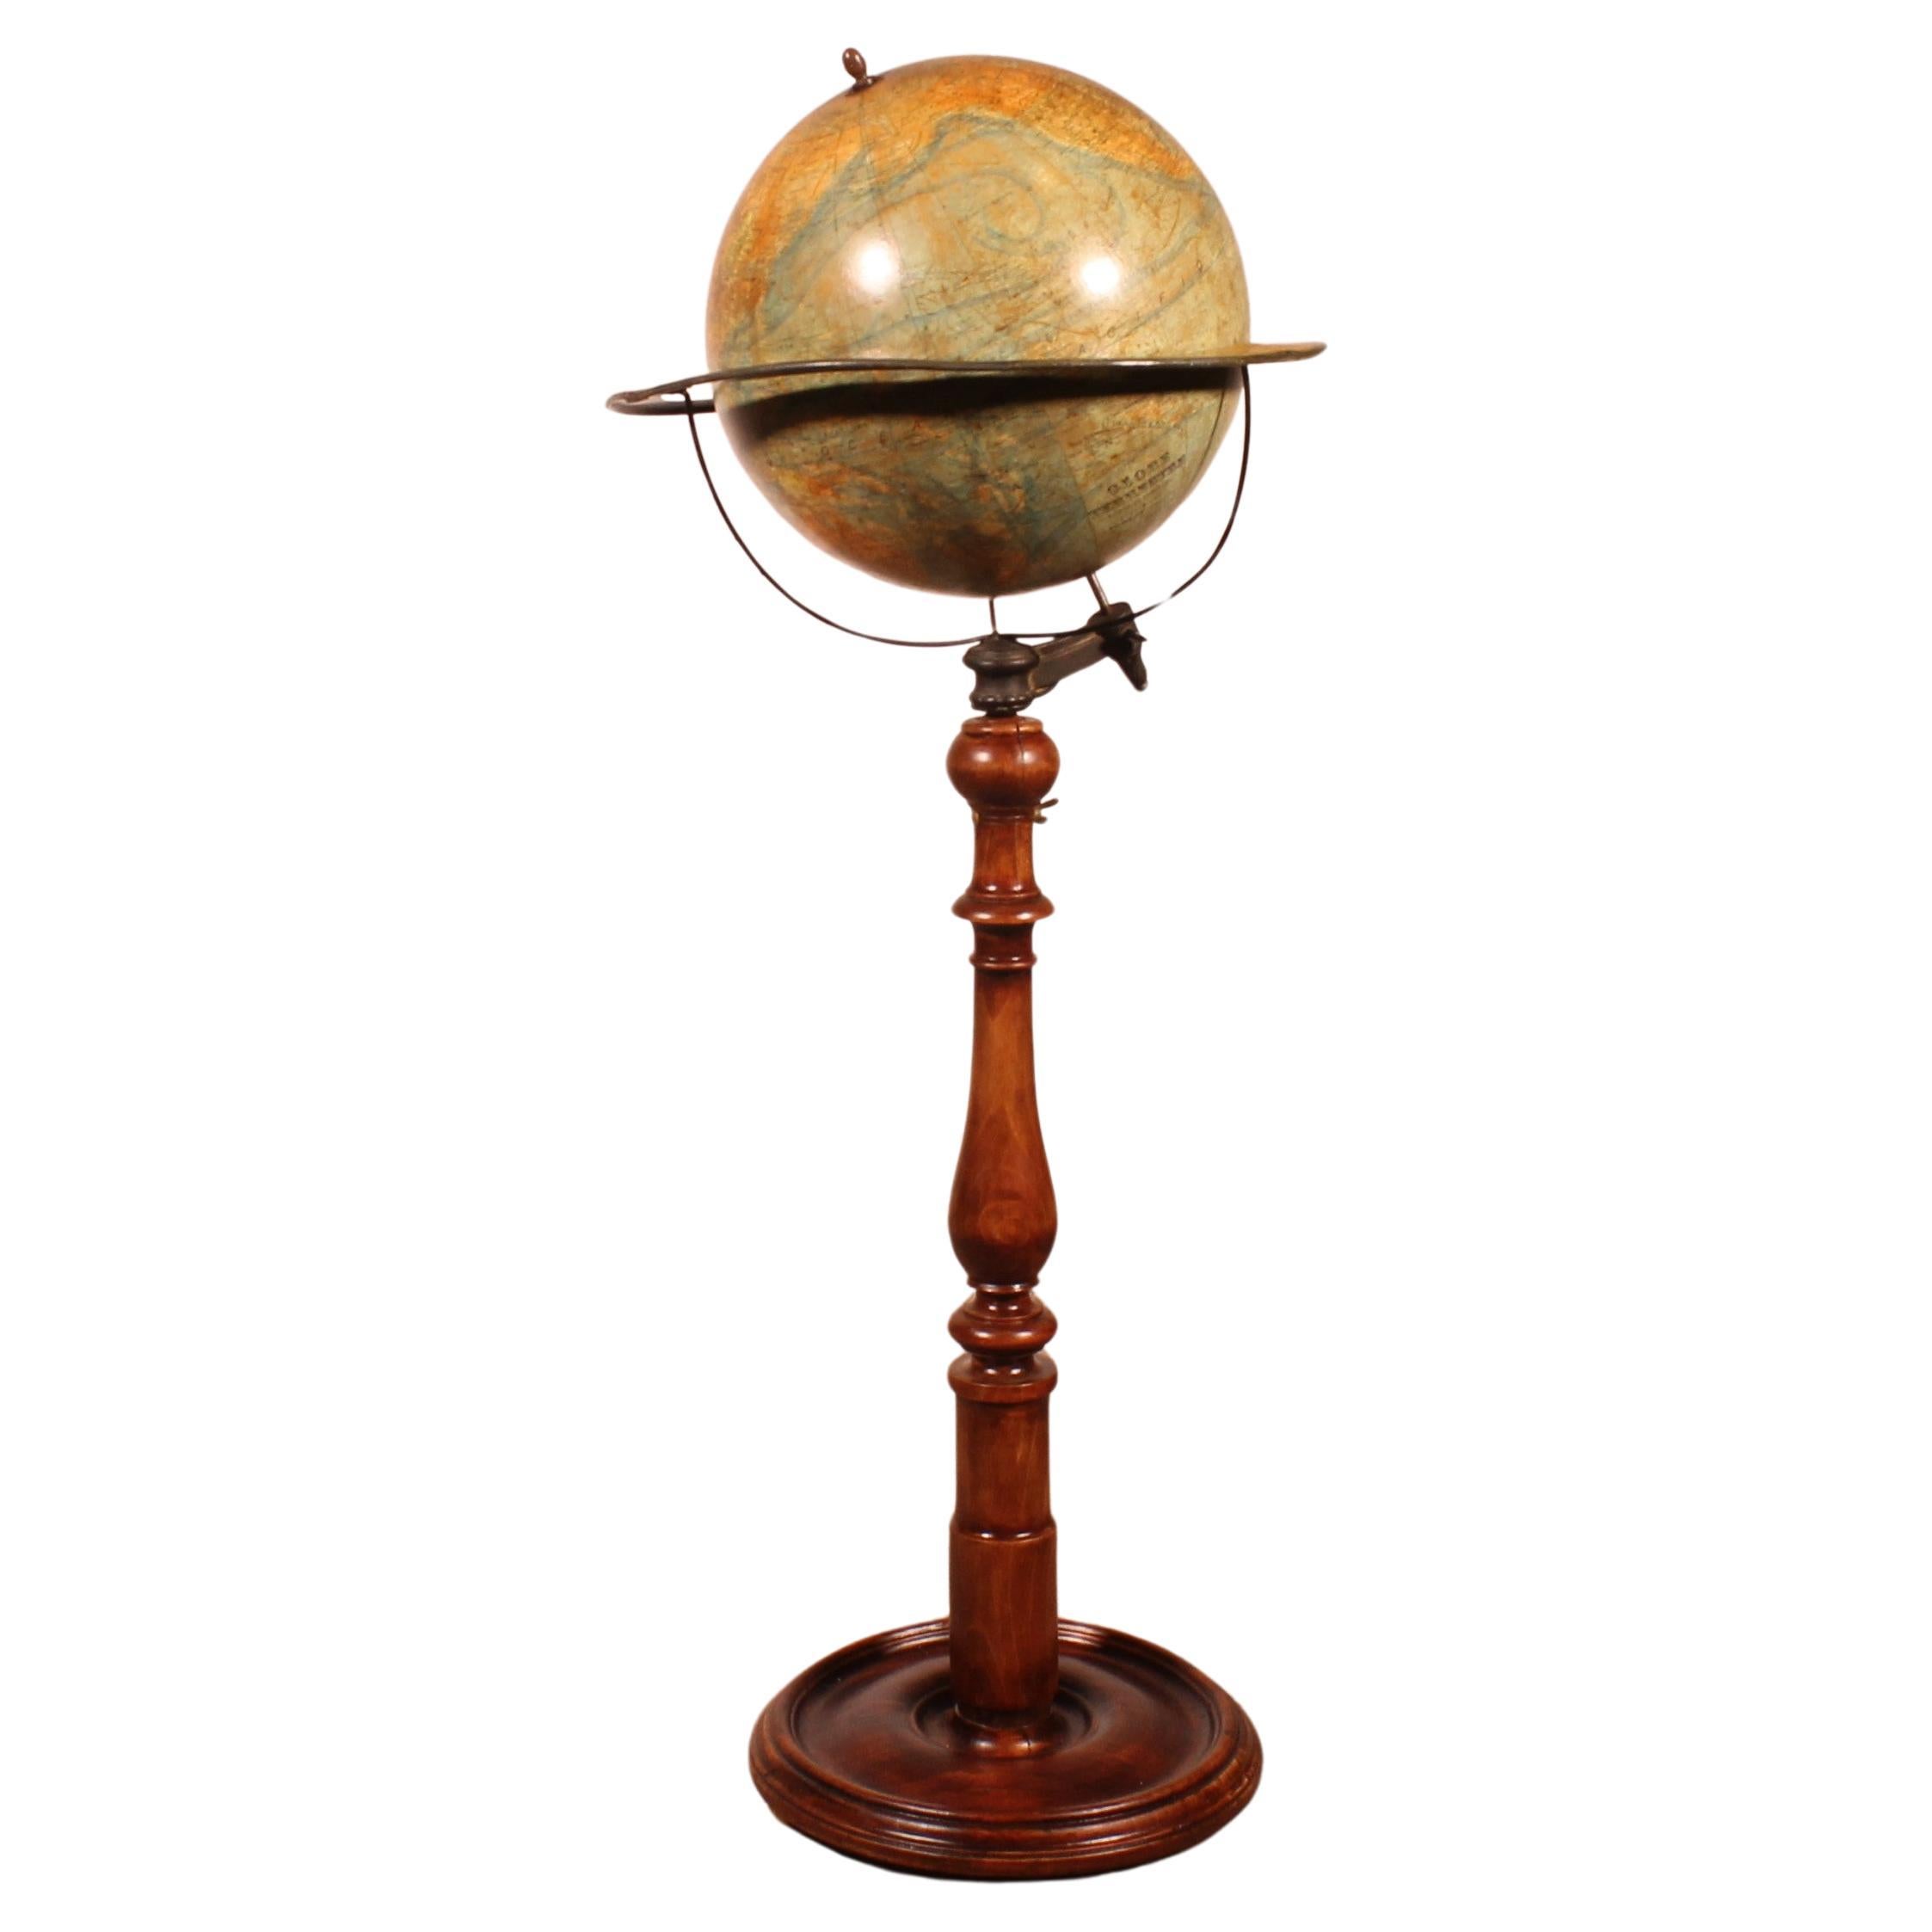 A Library Terrestrial Globe On Stand From J.forest Paris From The 19th Century For Sale